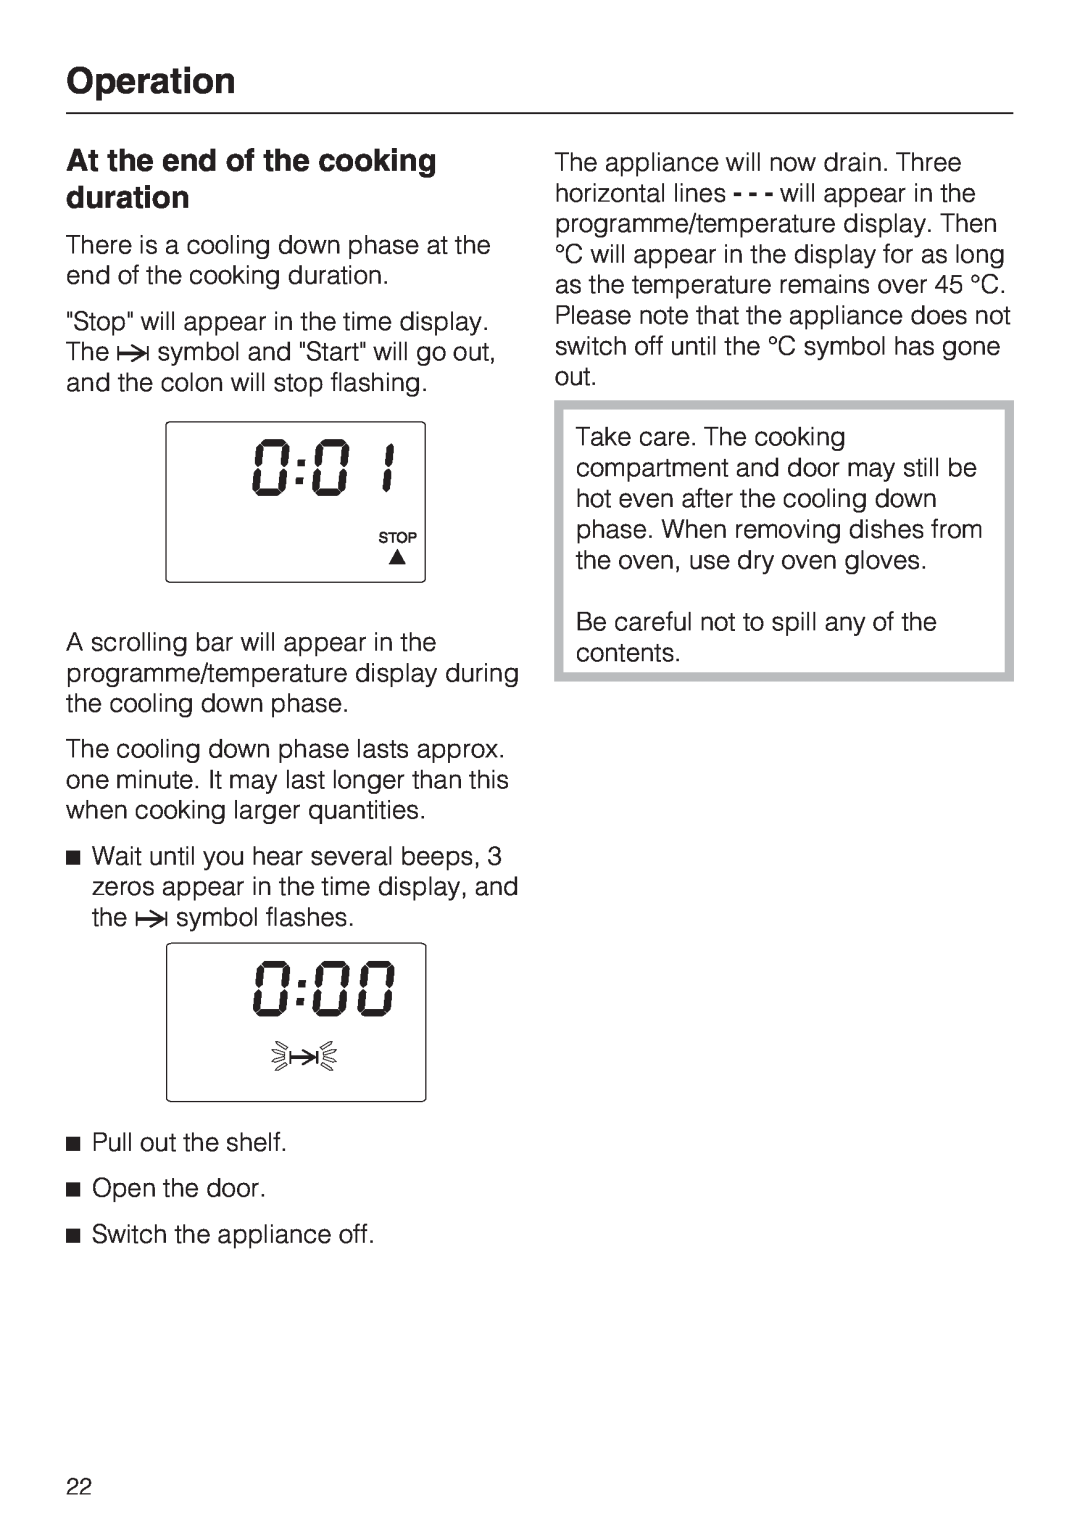 Miele DG 4164 L, DG 4064 L operating instructions At the end of the cooking duration, Operation 